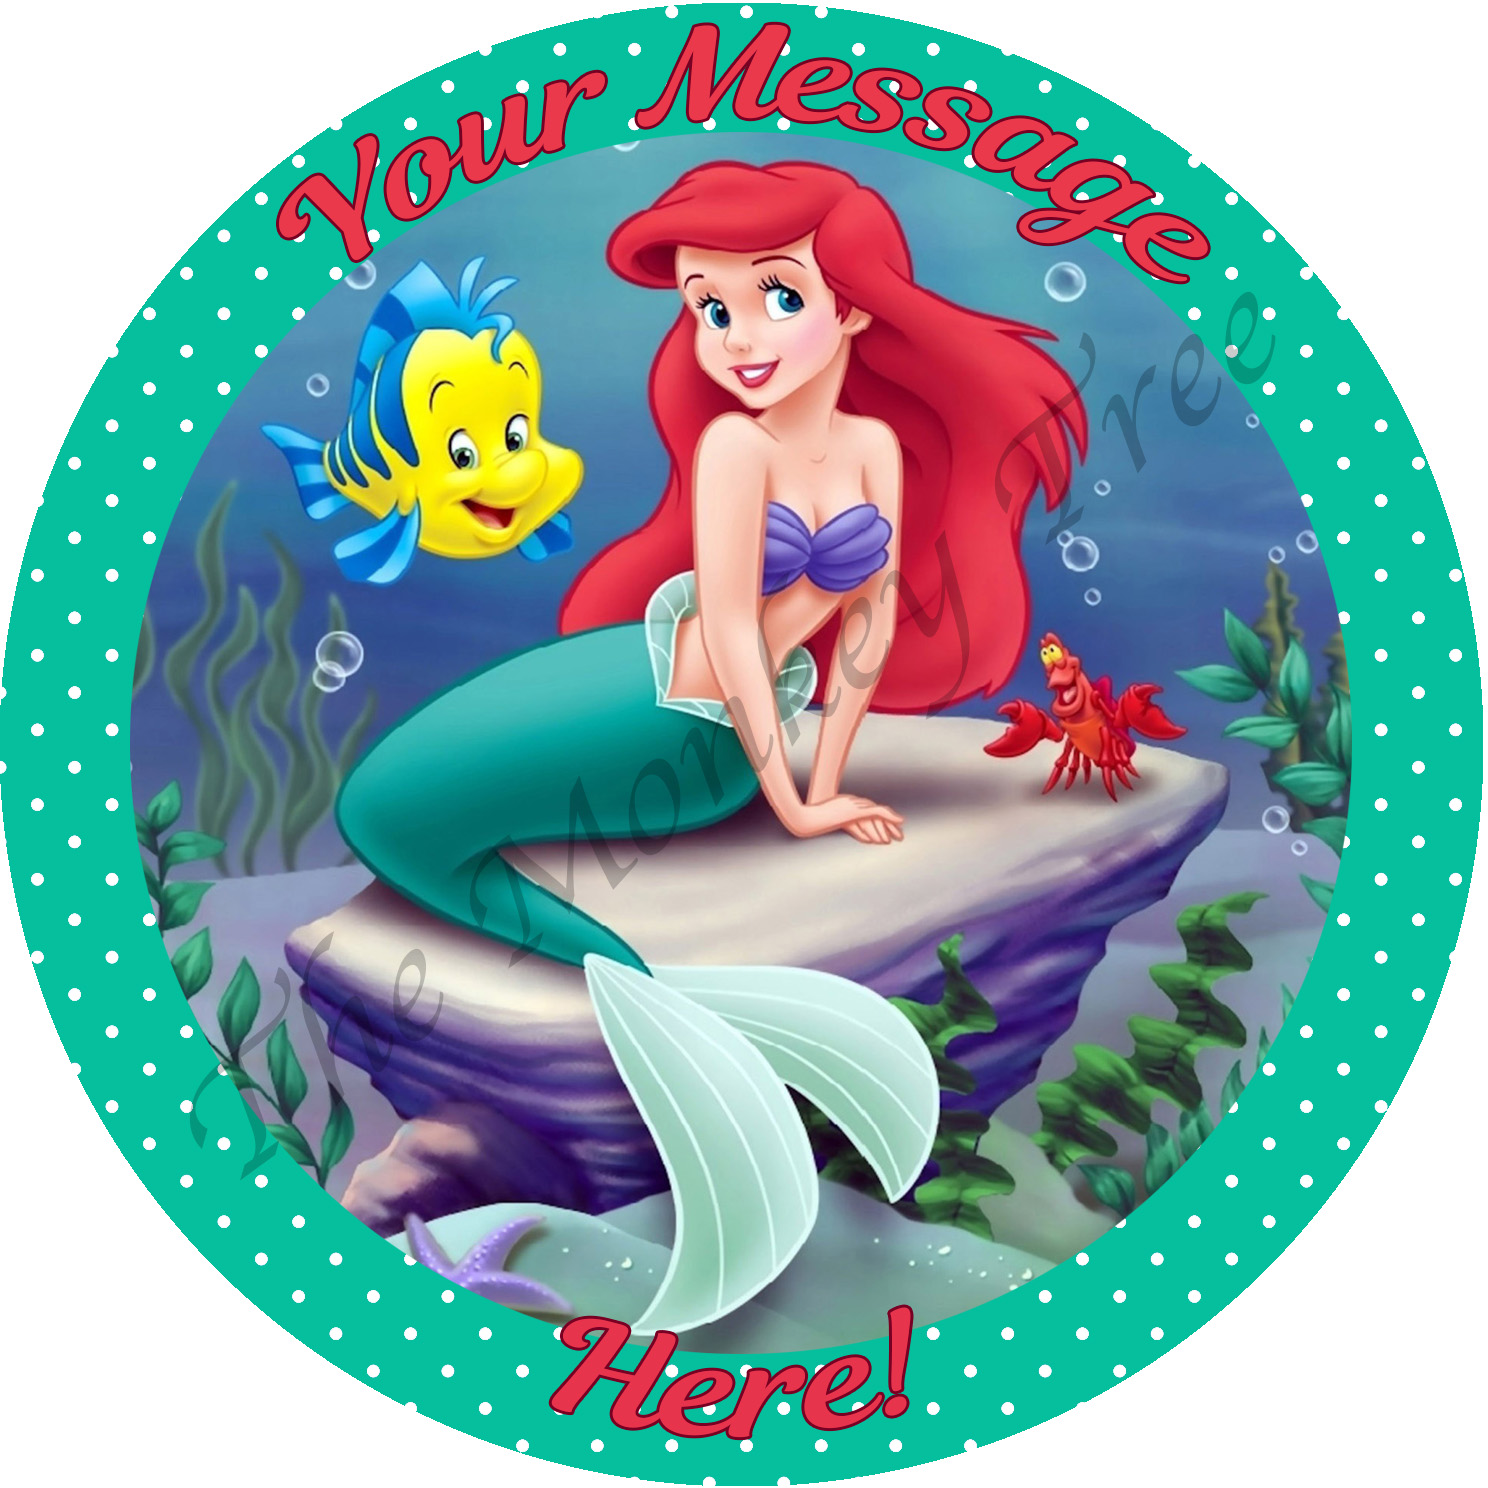 JUYRLE Mermaid Cake Topper, Mermaid Cake Decorations Ariel Cake Topper  Little Mermaid Disney Princess Cake Decoration Shell Starfish Lobster for  Baby Shower, Under the Sea, Mermaid Party Decorations : Amazon.in: Grocery &